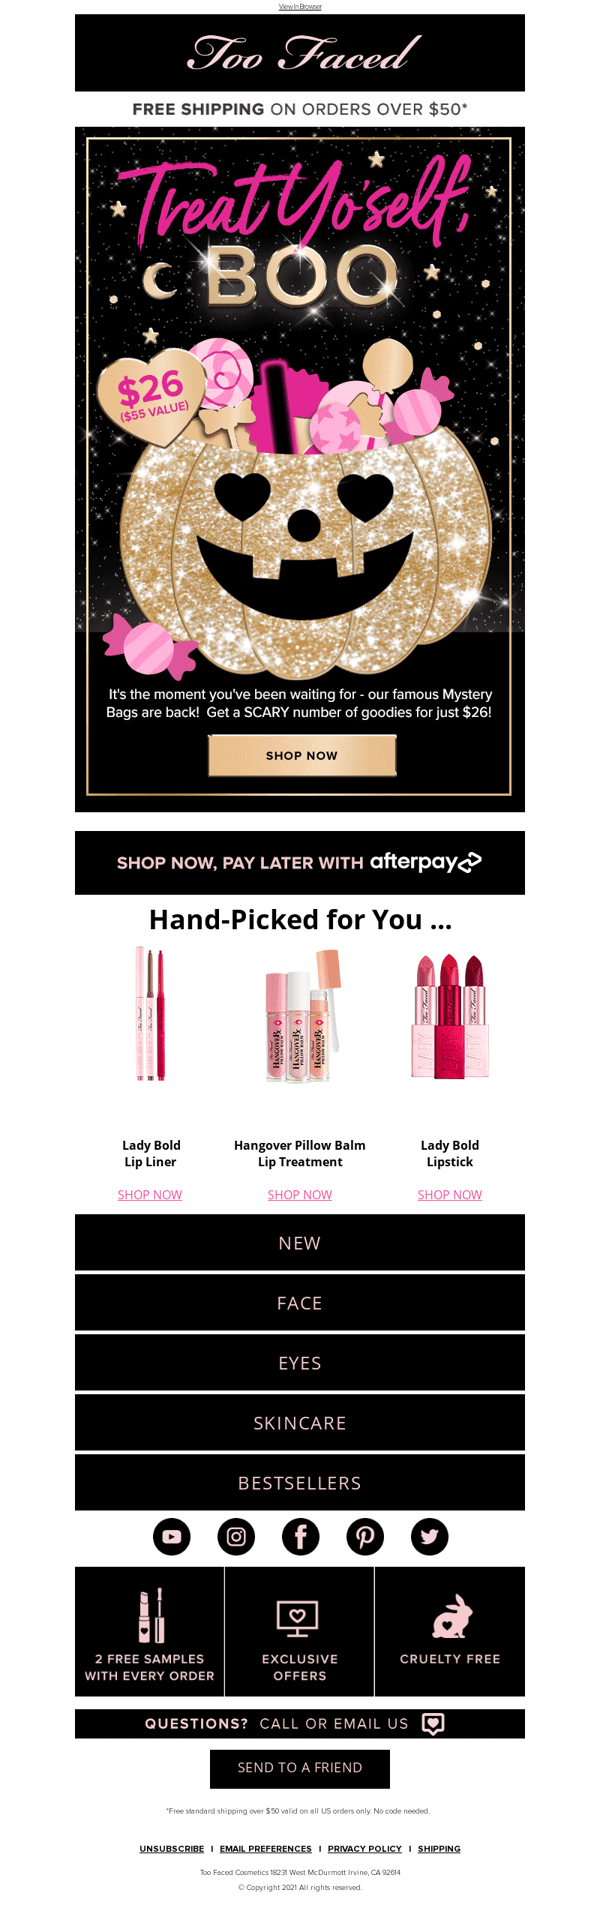 Too-Faced-Halloween-Email